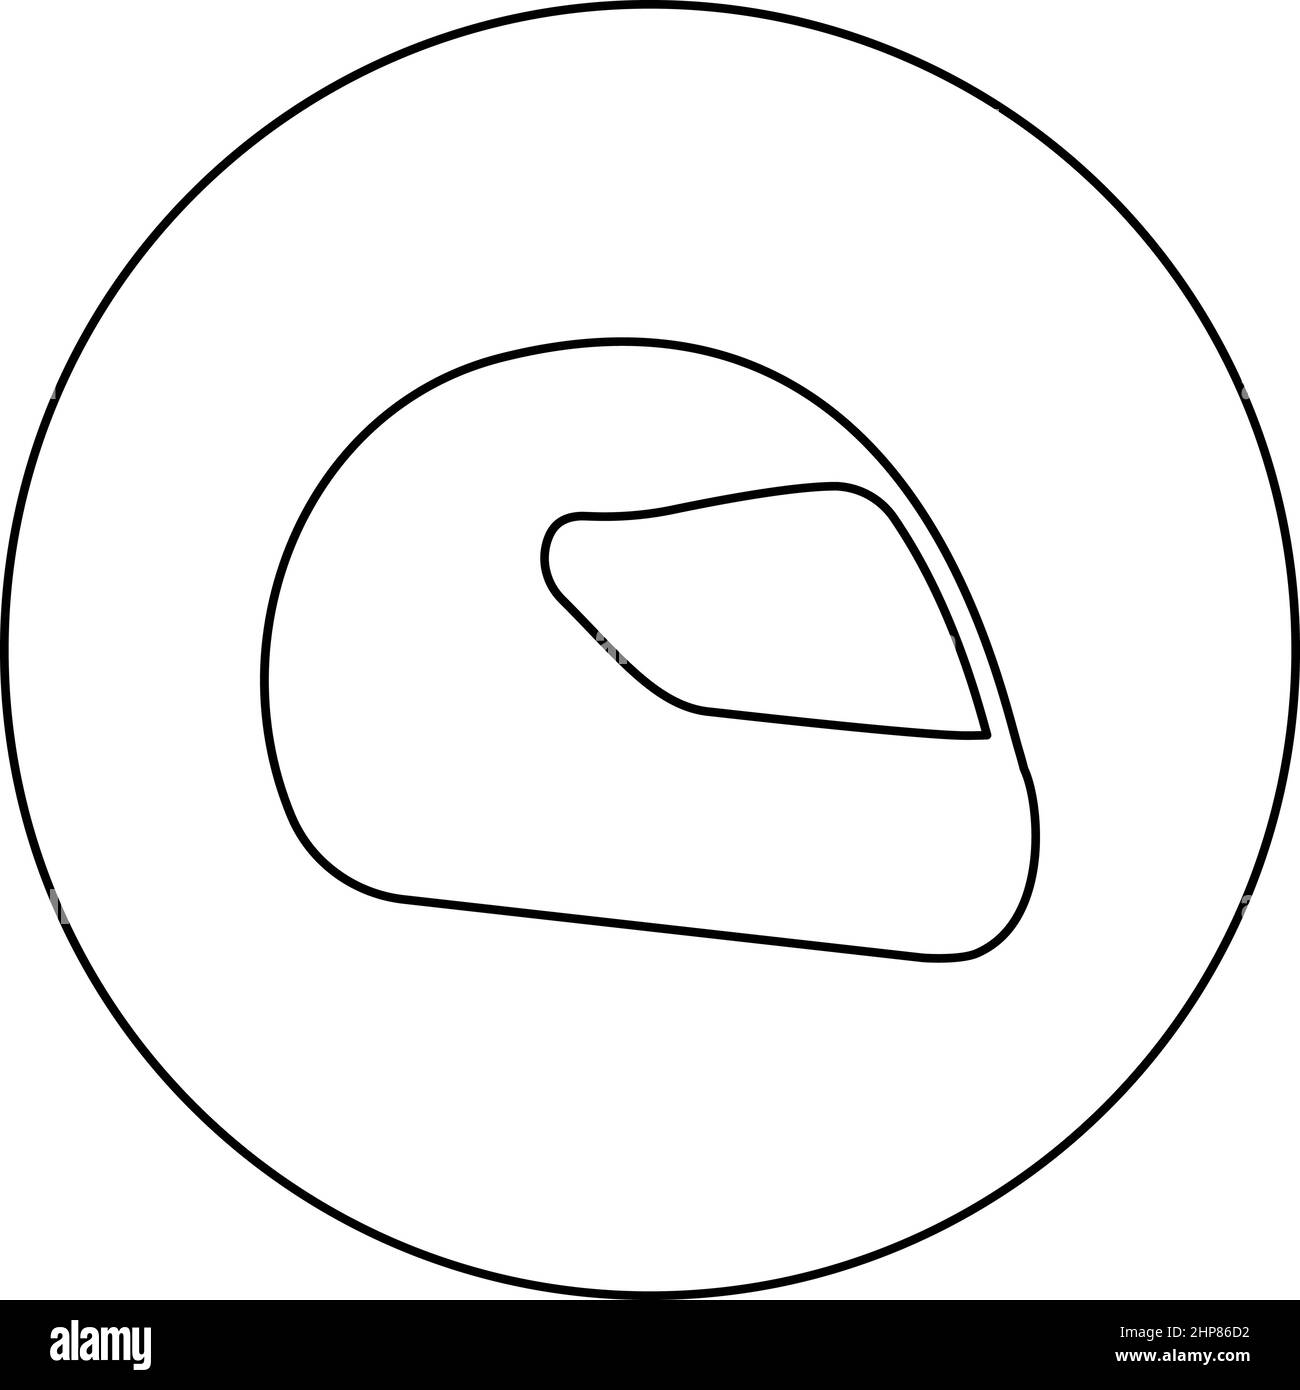 Helmet motorcycle racing sport icon in circle round black color vector illustration image outline contour line thin style Stock Vector